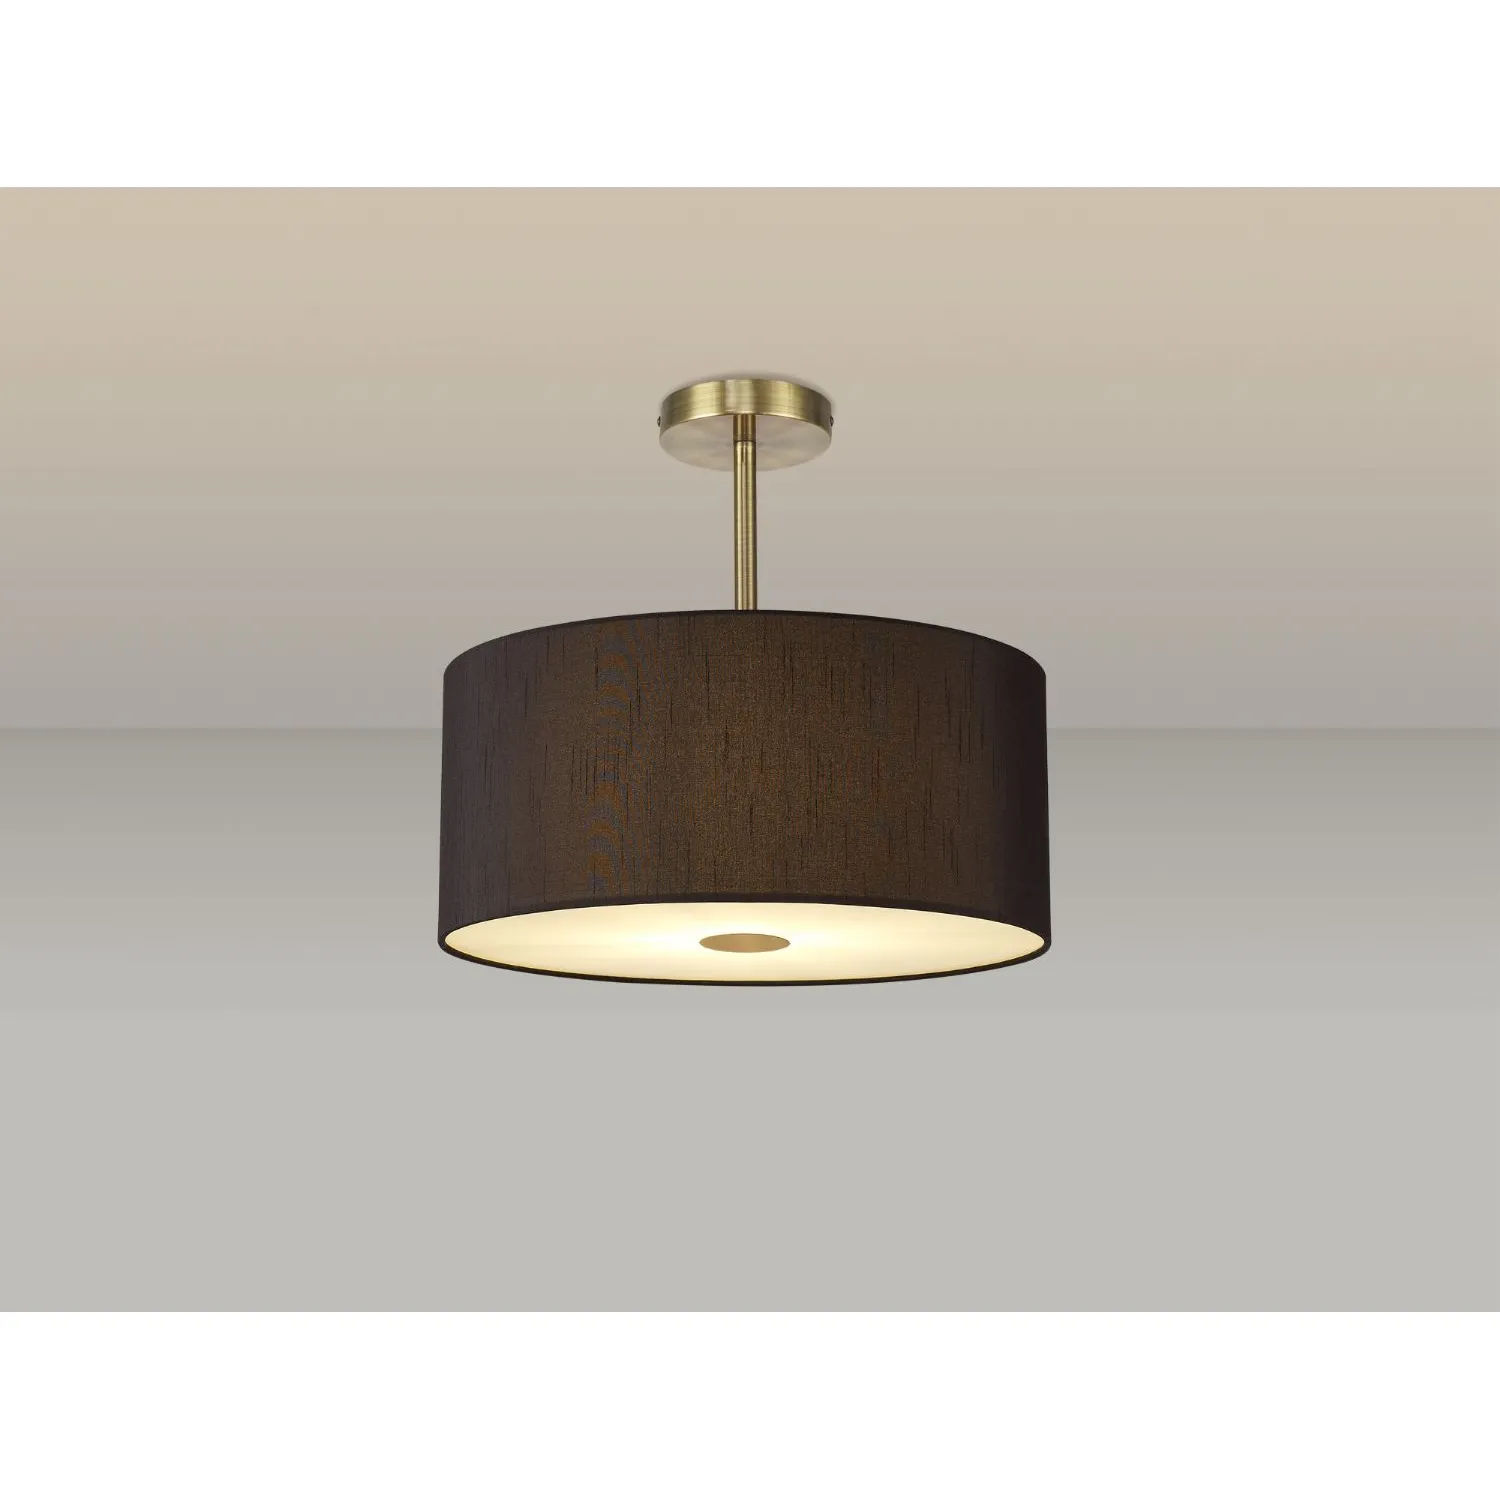 Baymont Antique Brass 5 Light E27 Semi Flush c w 400mm Faux Silk Shade, Black White Laminate And 400mm Frosted AB Acrylic Diffuser